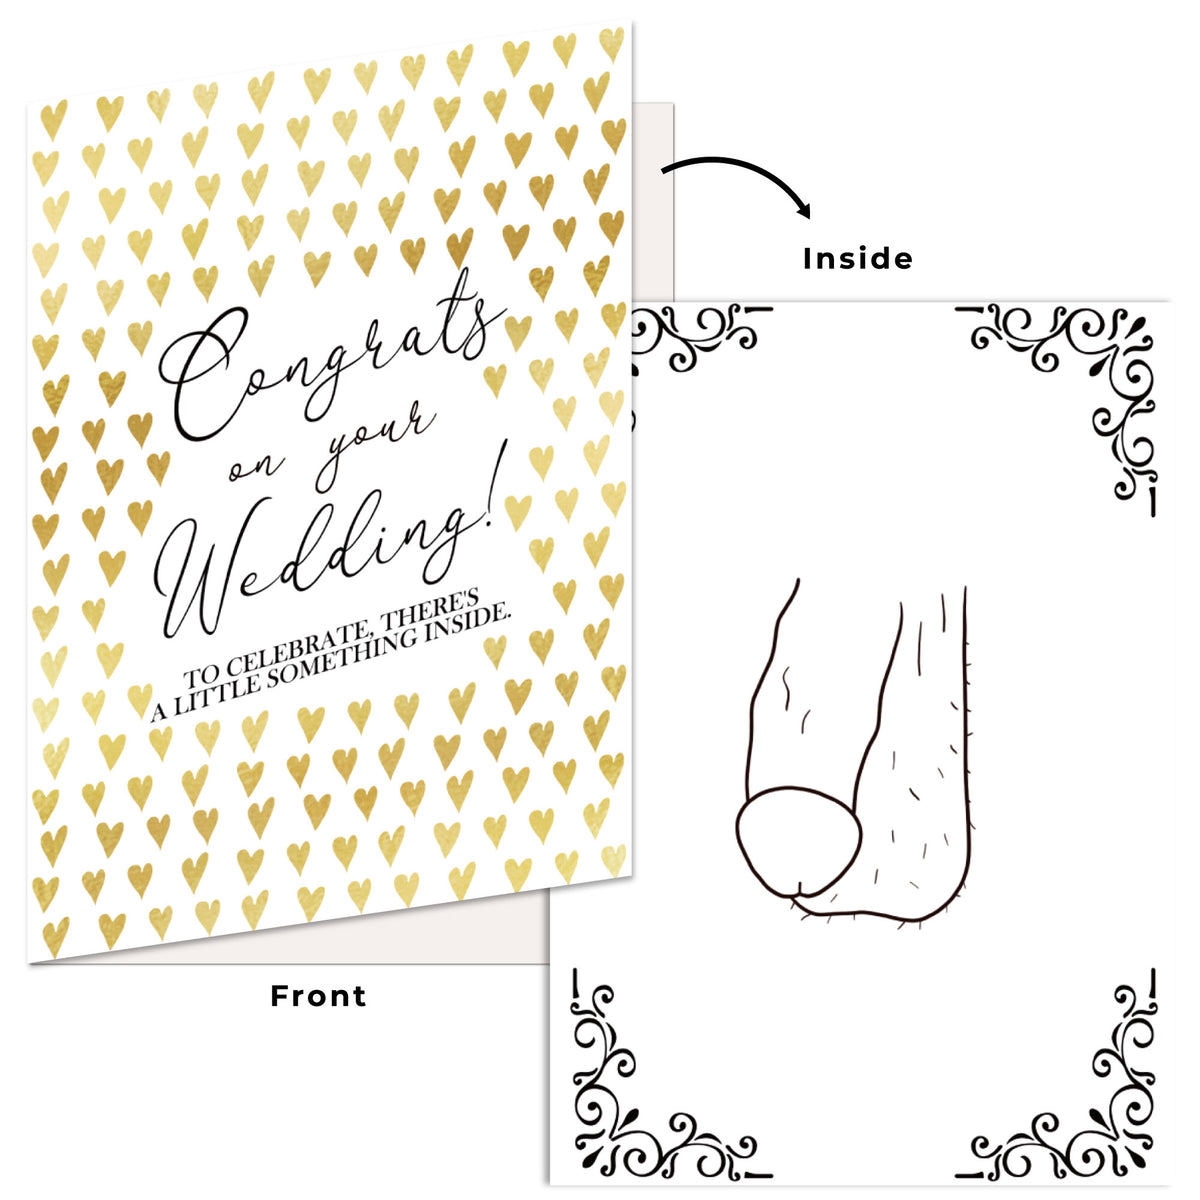 Funny Congratulations Card Hilarious Assorted Cards For Saying Congrats With Envelopes